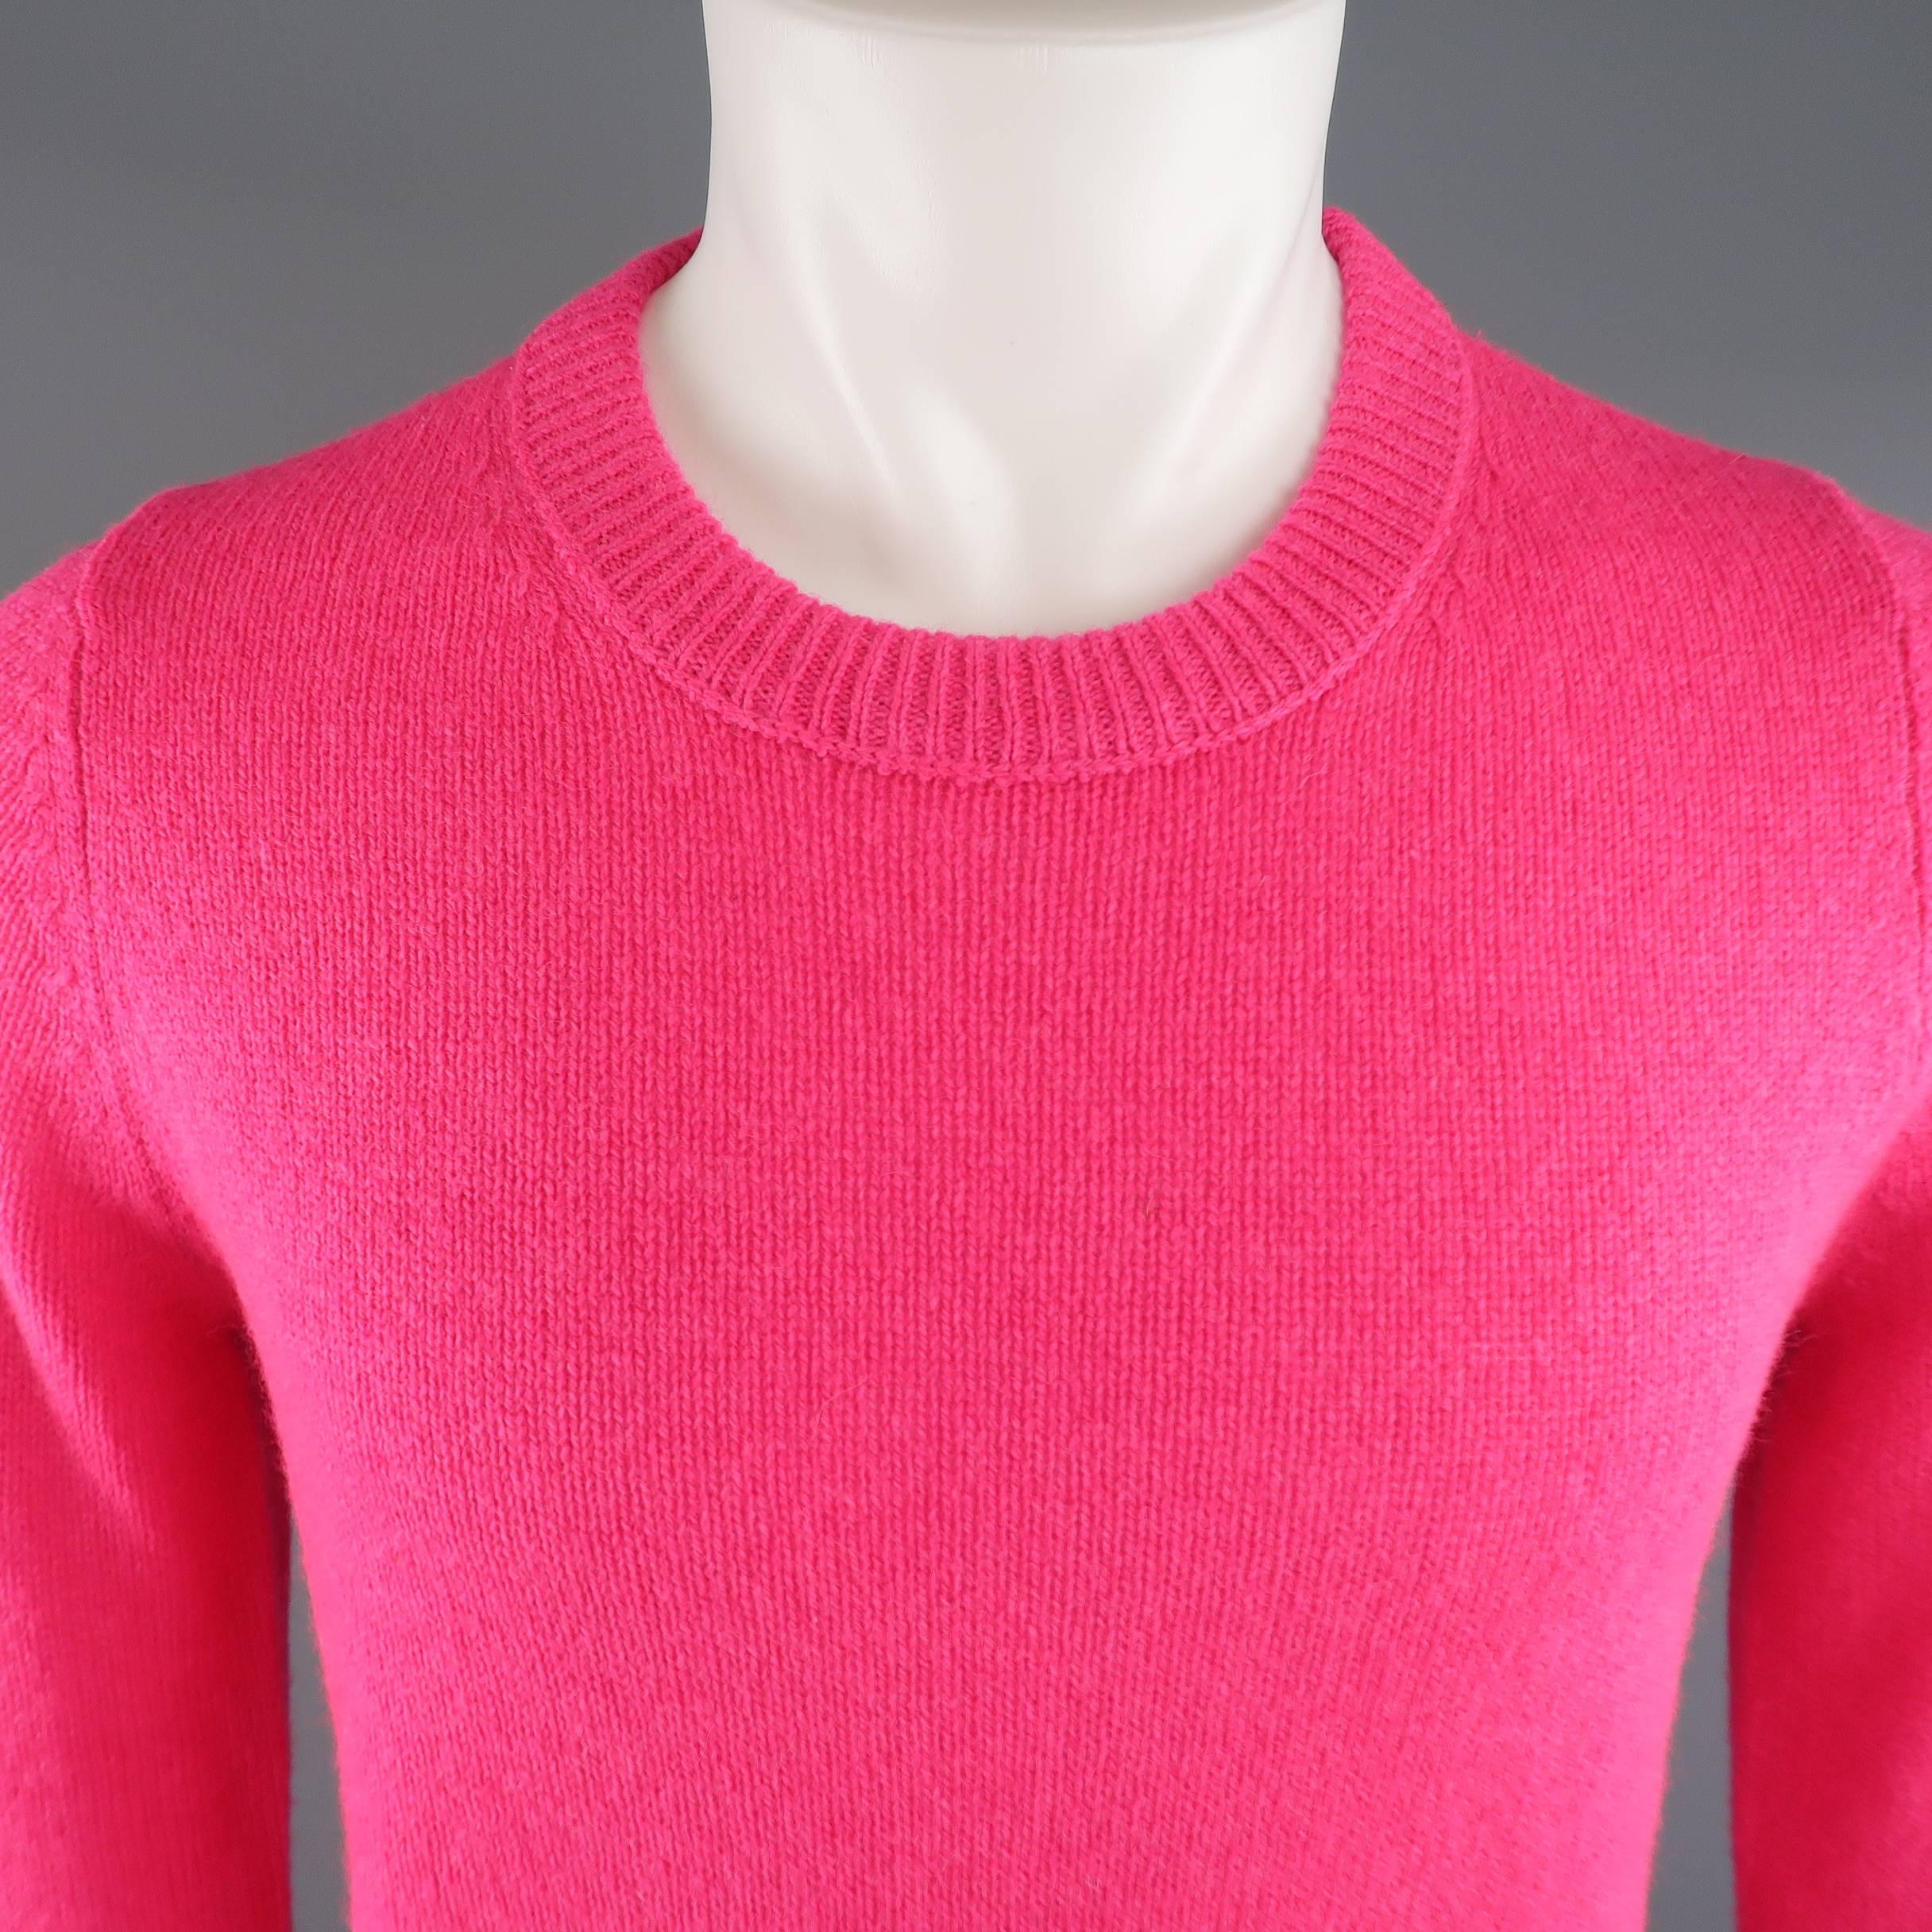 ACNE STUDIOS pullover sweater comes in neon pink wool knit with a ribbed crewneck and seamed shoulders at back.
 
New with Tags.
Marked: M
 
Measurements:
 
Shoulder: 15 in.
Chest: 41 in.
Sleeve: 29 in.
Length: 24.5 in.

SKU: 85501